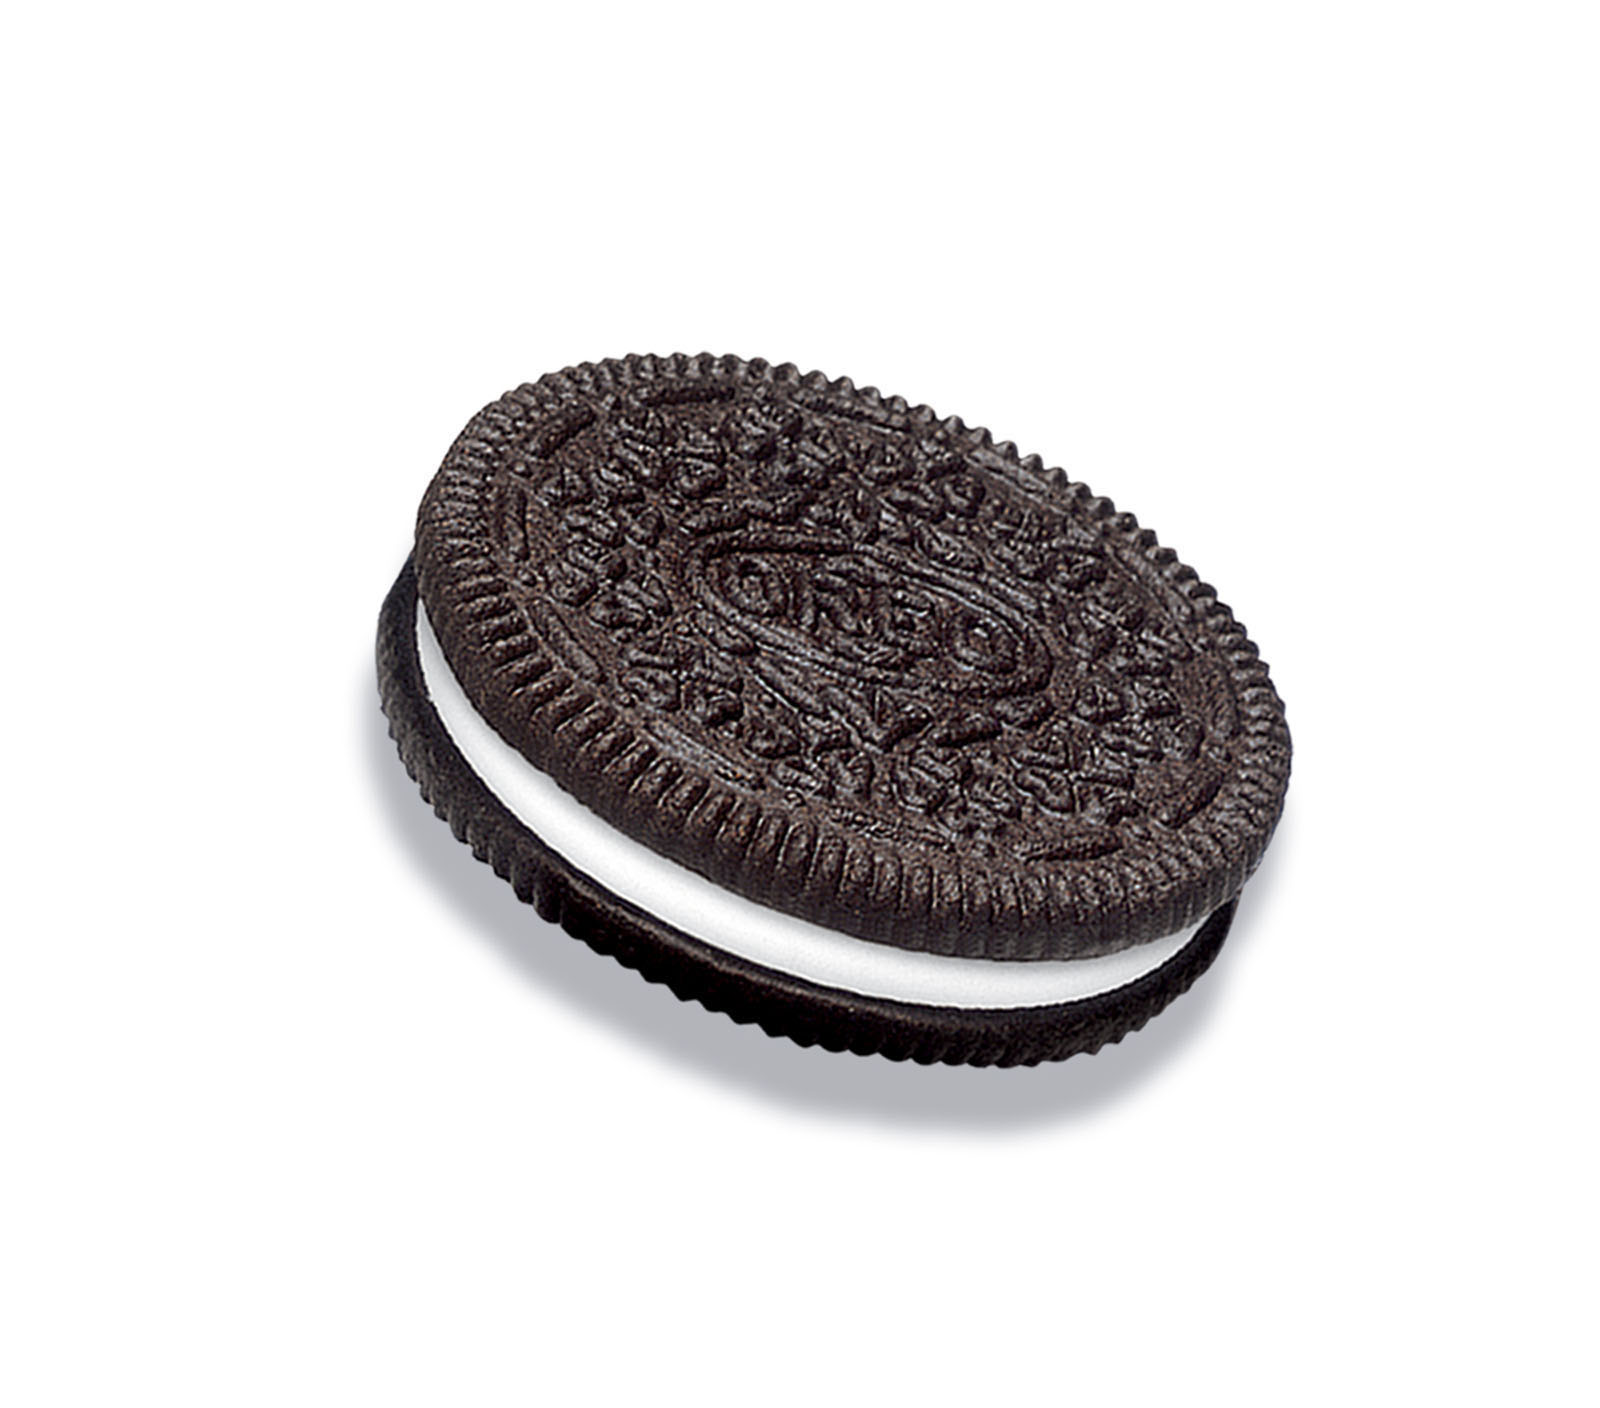 Oreo Image HD Wallpaper And Background Photos